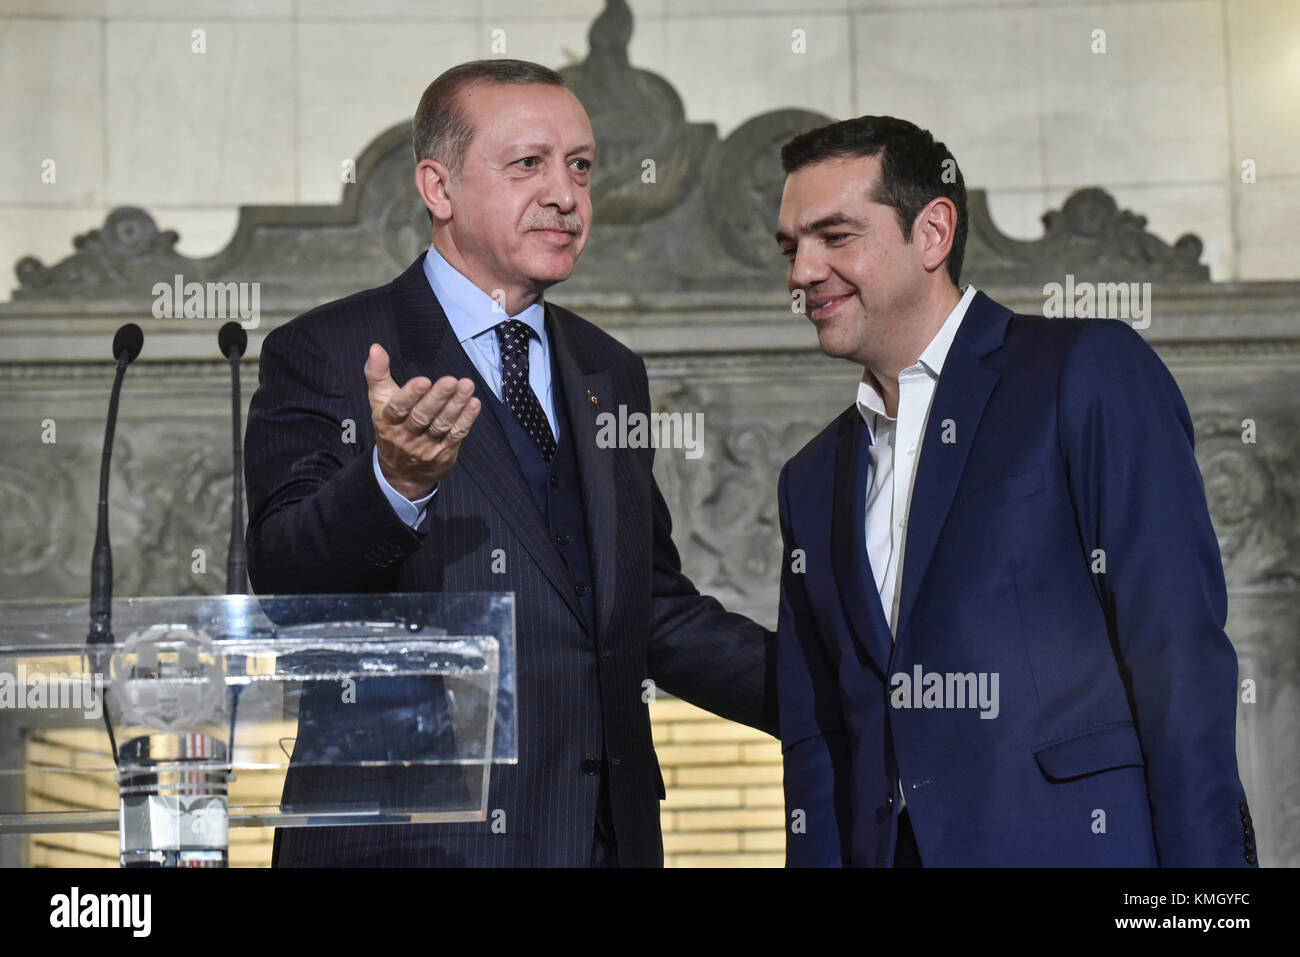 Athens, Greece - December 7, 2017: Greek prime minister Alexis Tsipras (R) and Turkish President Recep Tayyip Erdogan (L) during a joint press conference the in Athens Credit: VASILIS VERVERIDIS/Alamy Live News Stock Photo